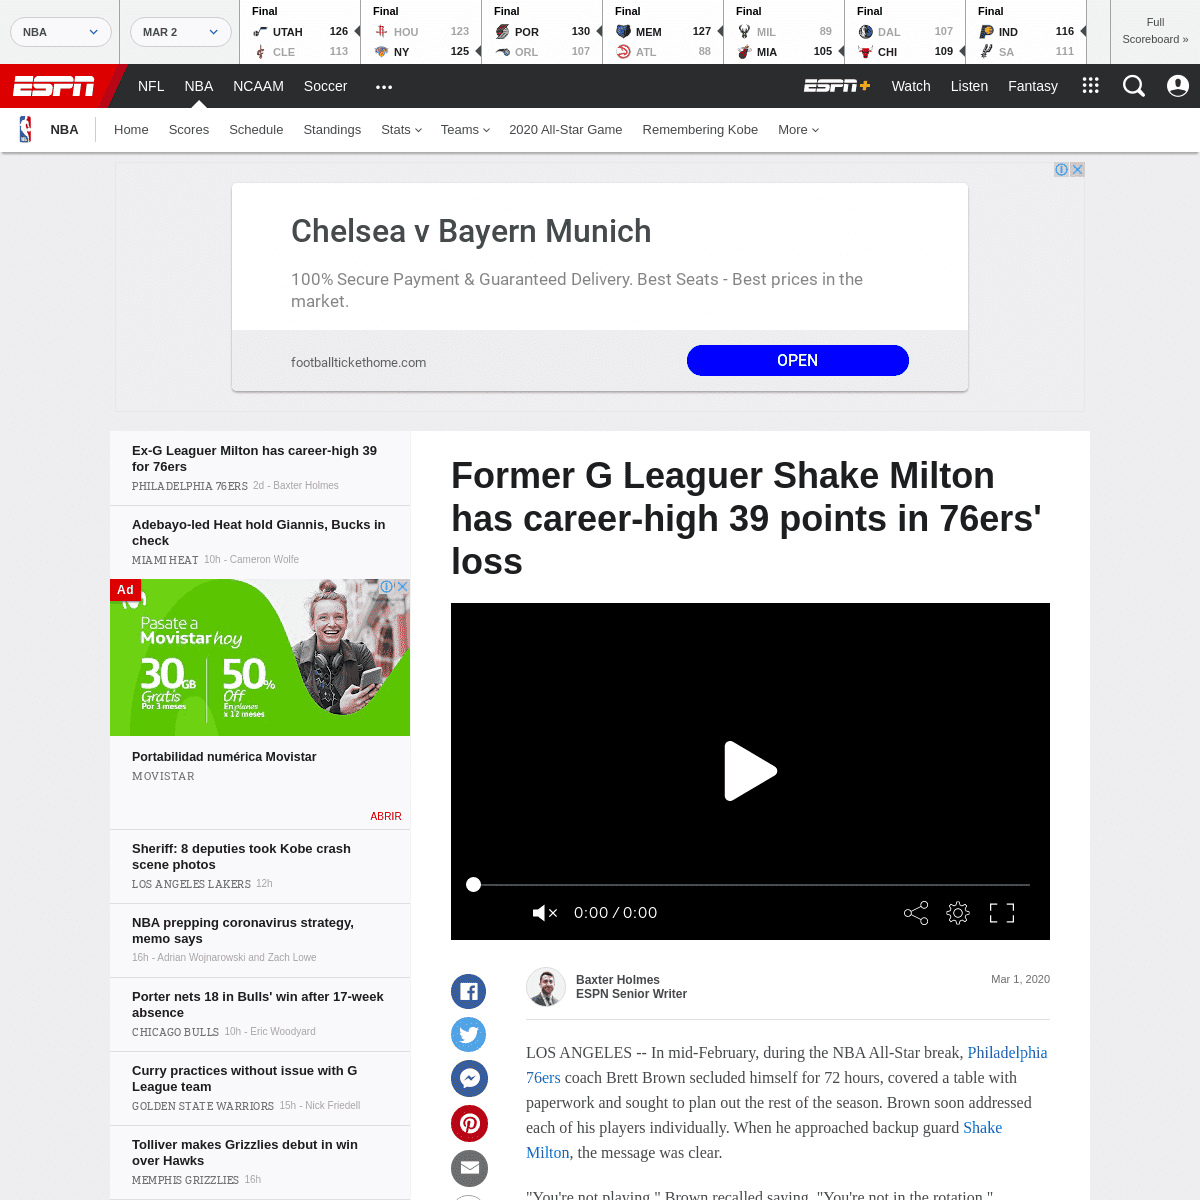 A complete backup of www.espn.com/nba/story/_/id/28817241/former-g-leaguer-shake-milton-career-high-39-points-76ers-loss